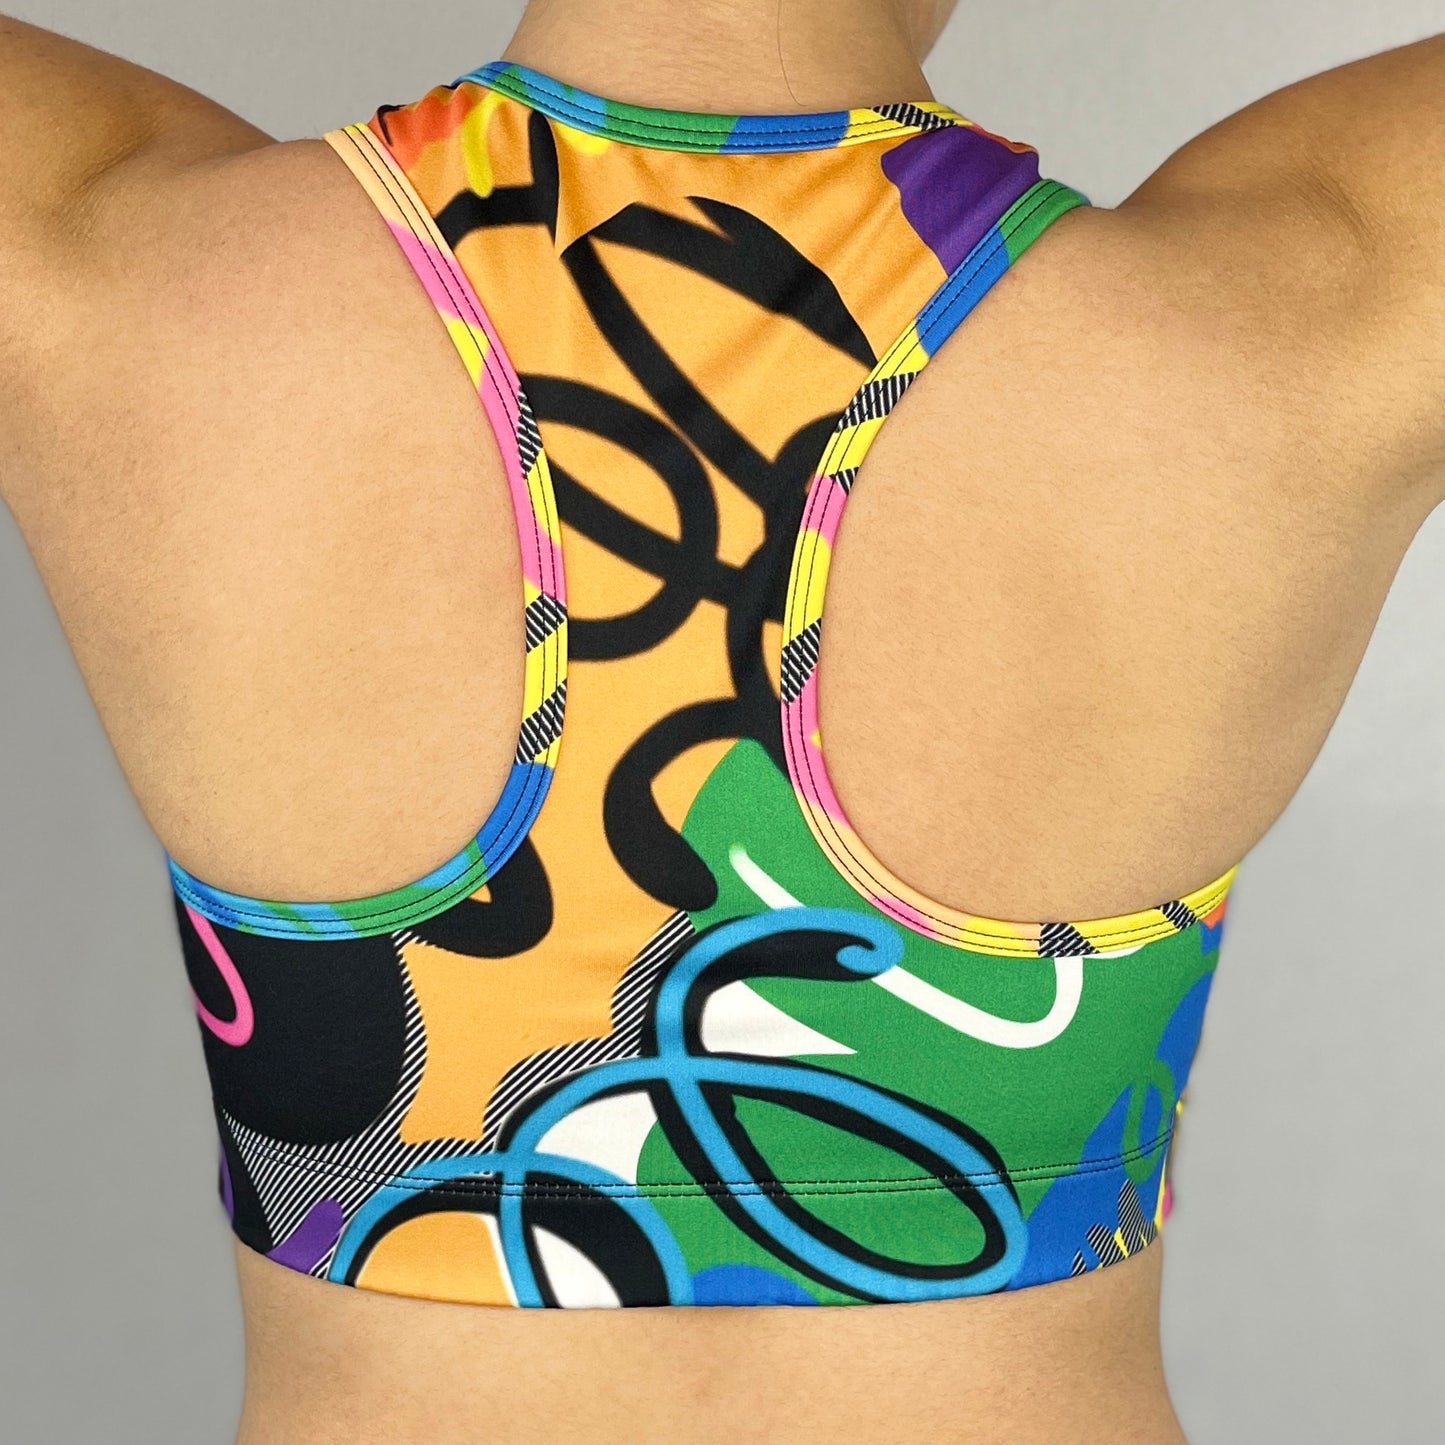 colourful sports bra made sustainably from recycled materials - Venus - back